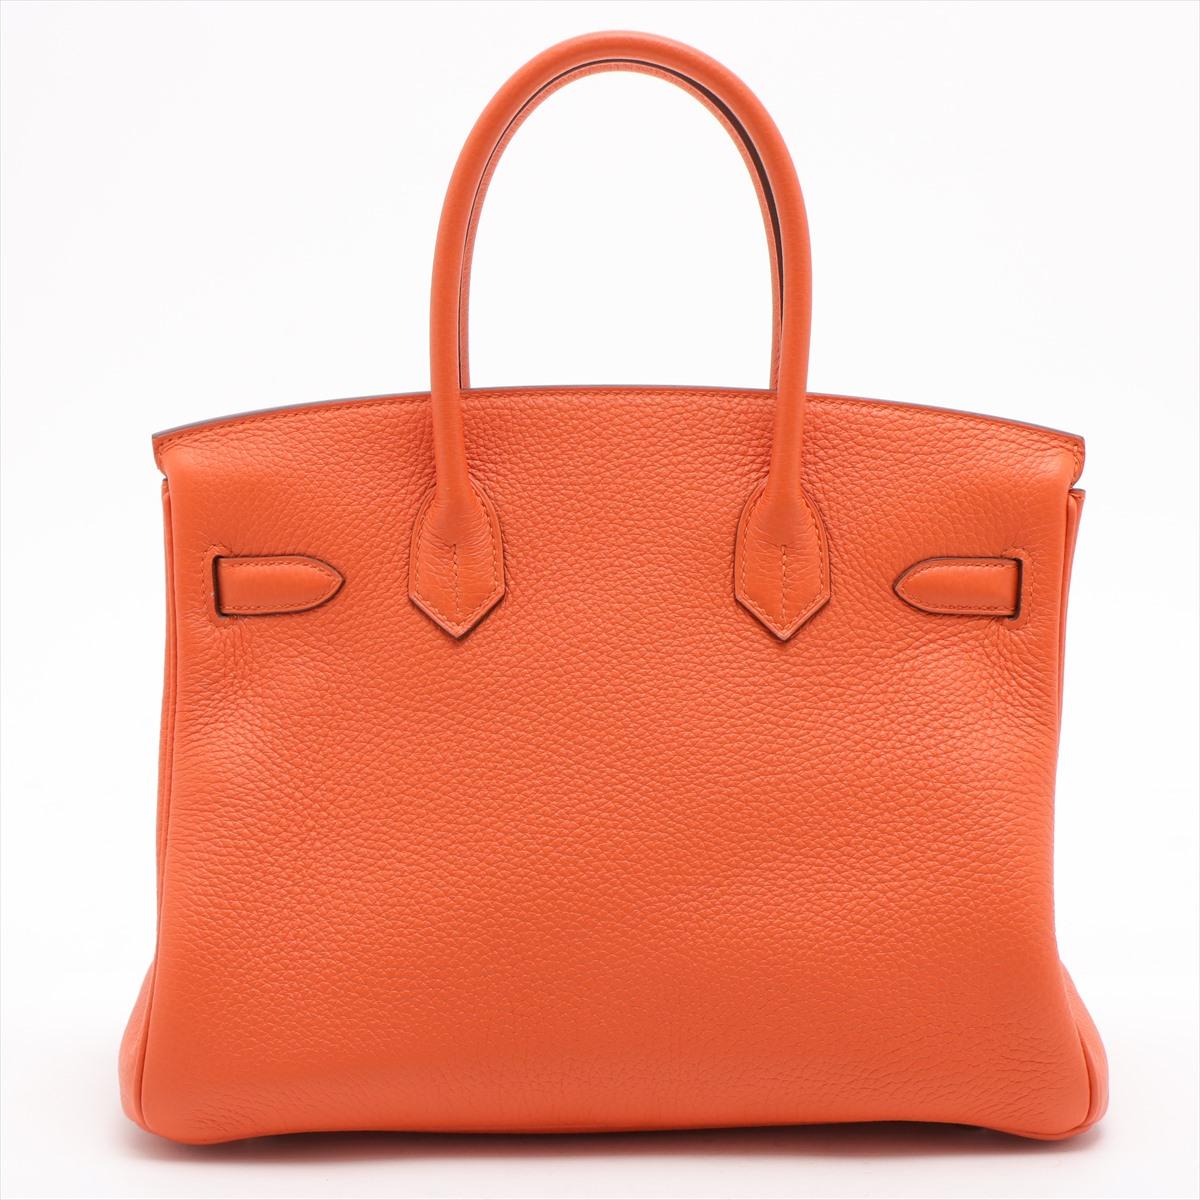 Brand: Hermes

Product: Birkin Retourne

Size: 30 Cm

Colour: Orange

Material: Clemence Leather

Hardware: Palladium

Year: U 2022

Condition:
Pristine:

The product is in pristine condition, without any signs of wear or damage. It appears brand